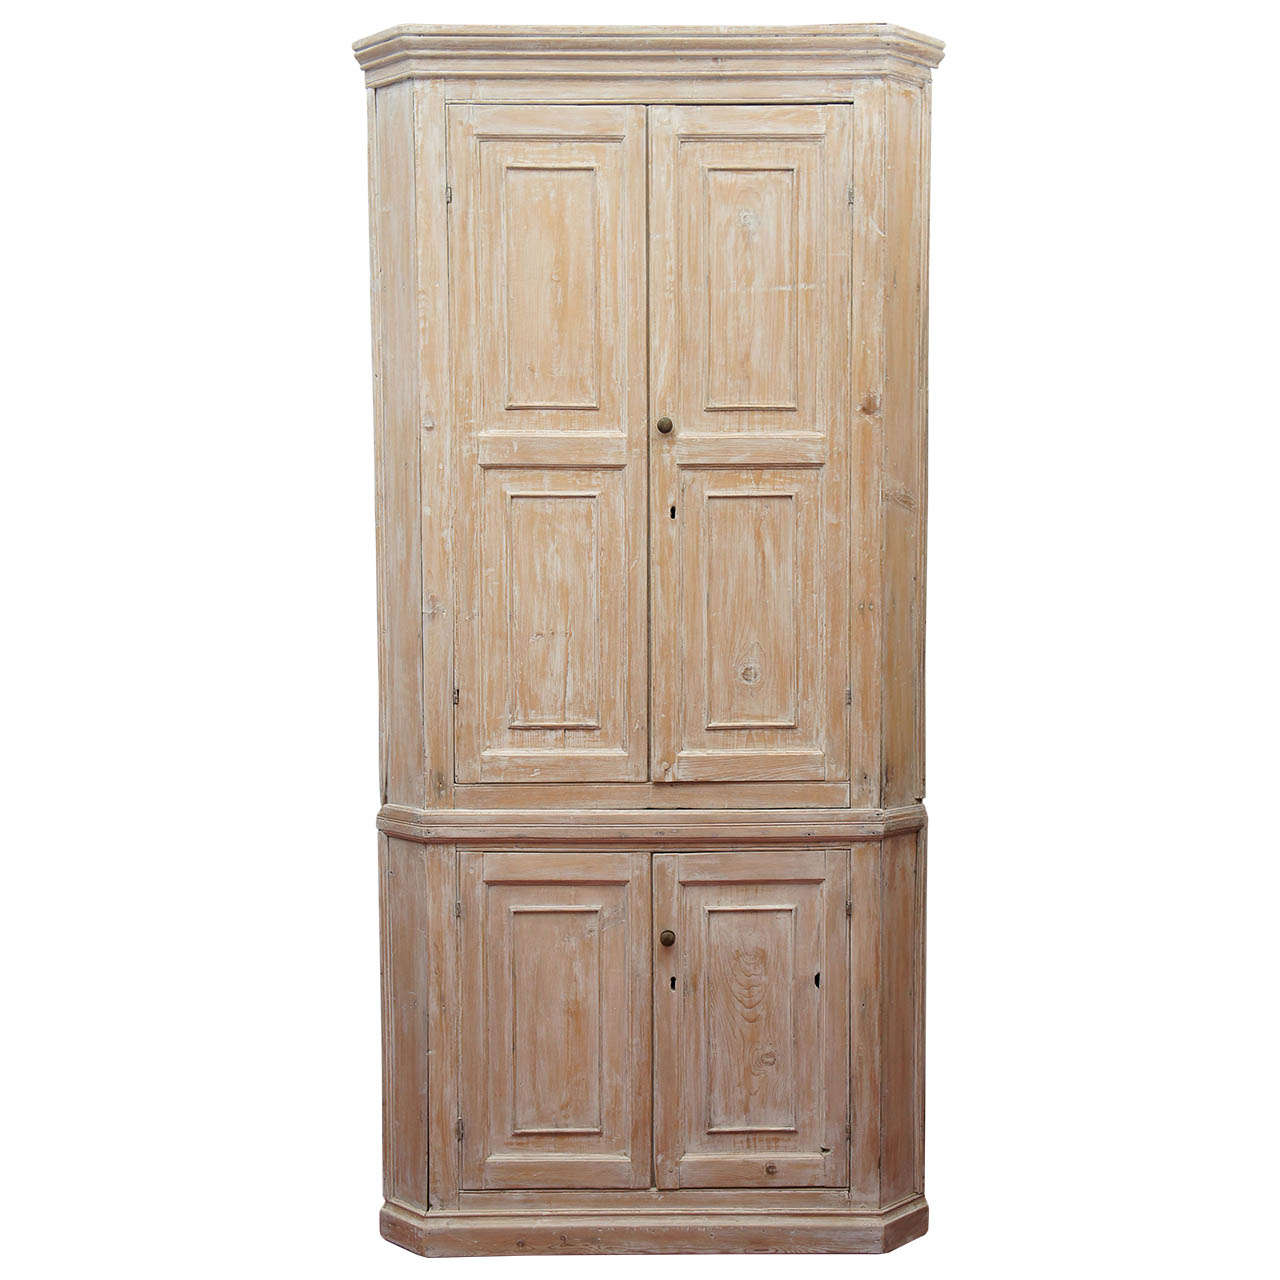 Early American Two-Part Pine Corner Cupboard